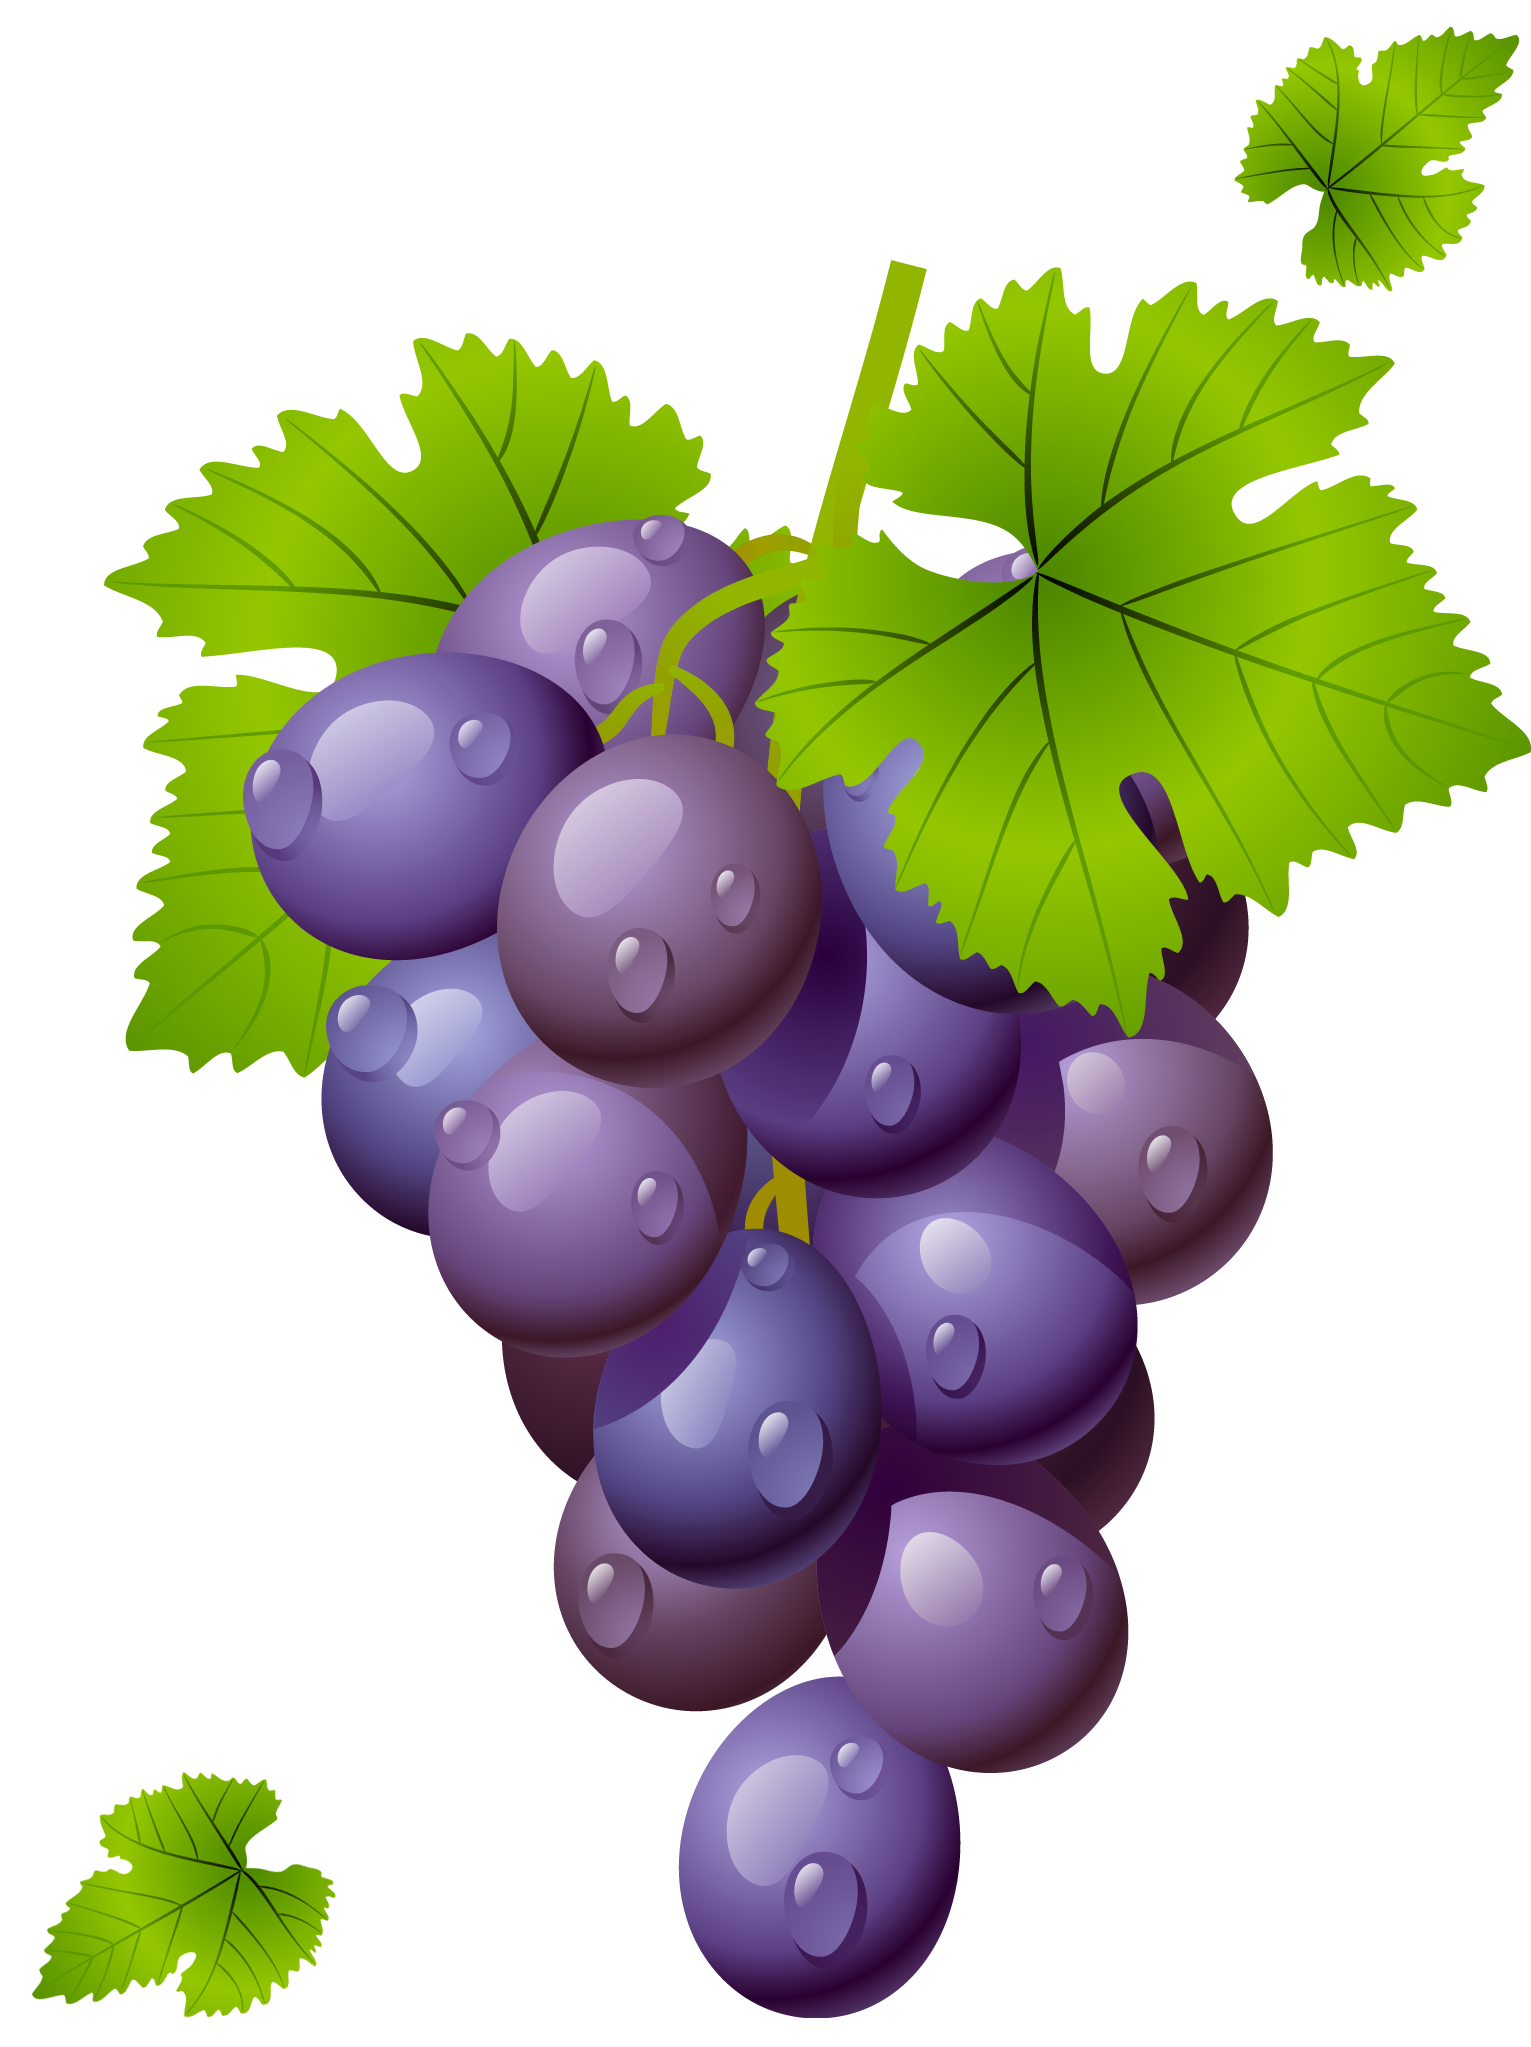 Watermelon clipart gambar. Grape with leaves png